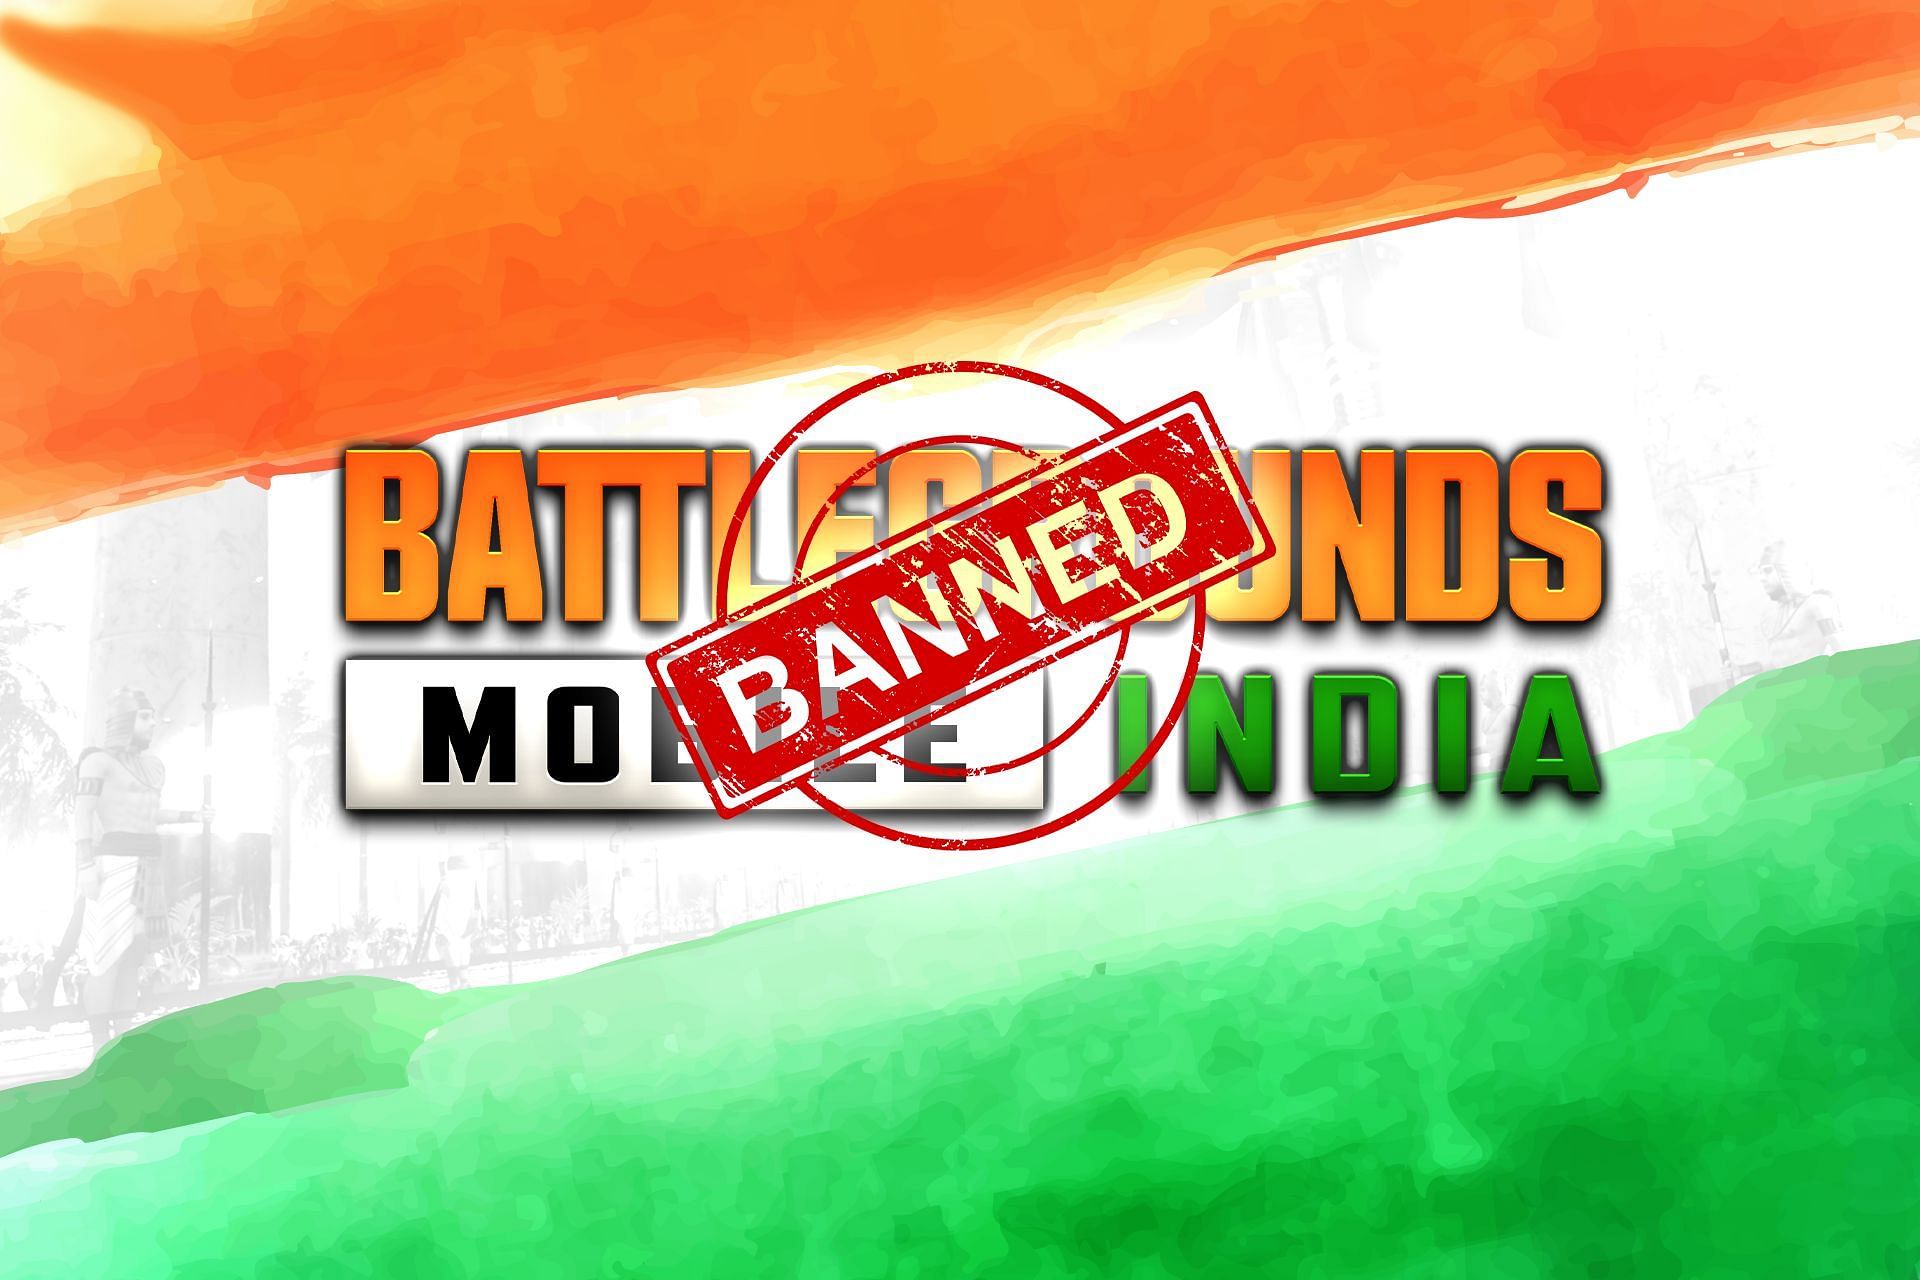 BGMI remains banned over three months as players wait for its return (Image via Sportskeeda)